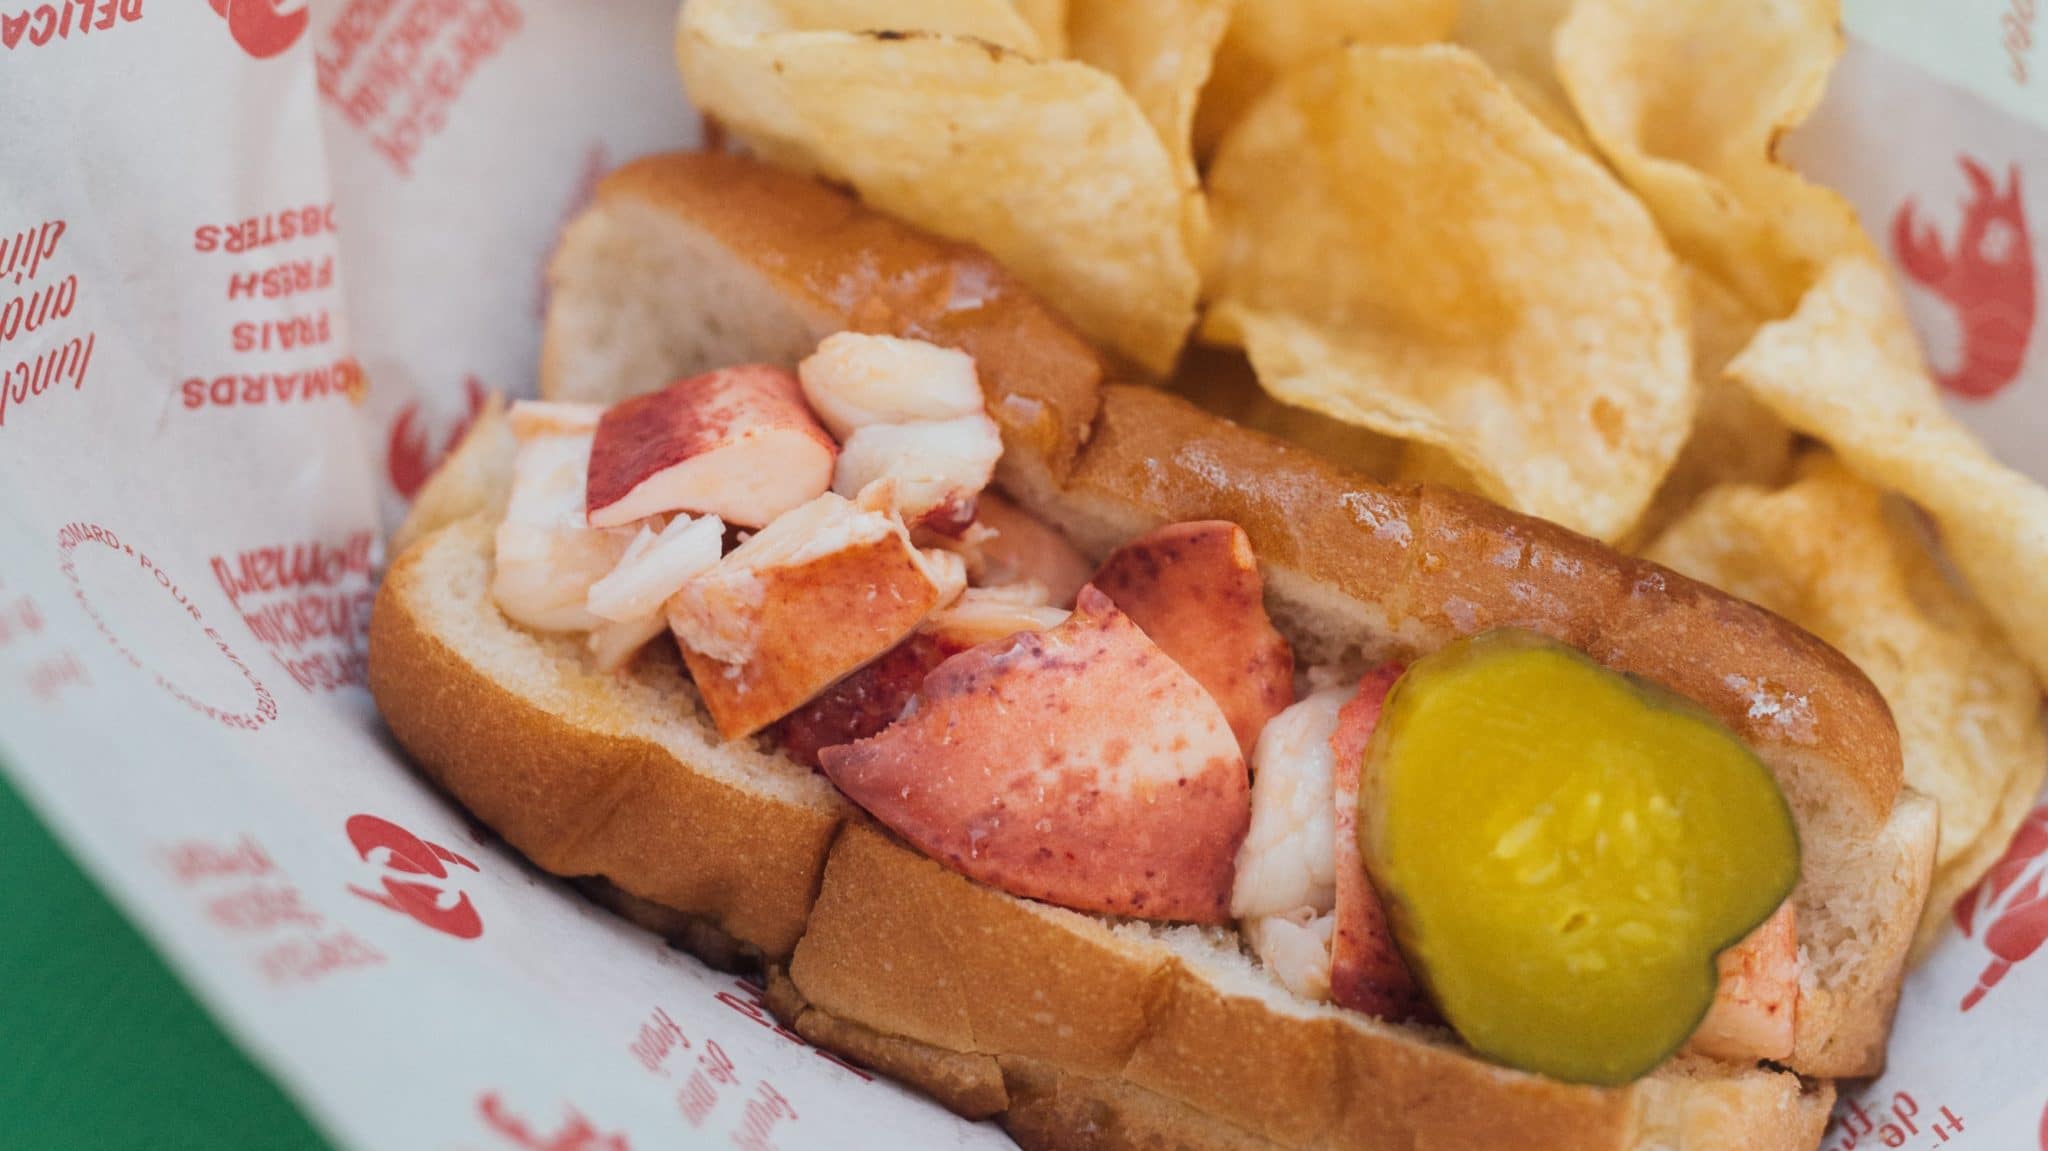 The Best Lobster Rolls in Montreal: Our suggestions